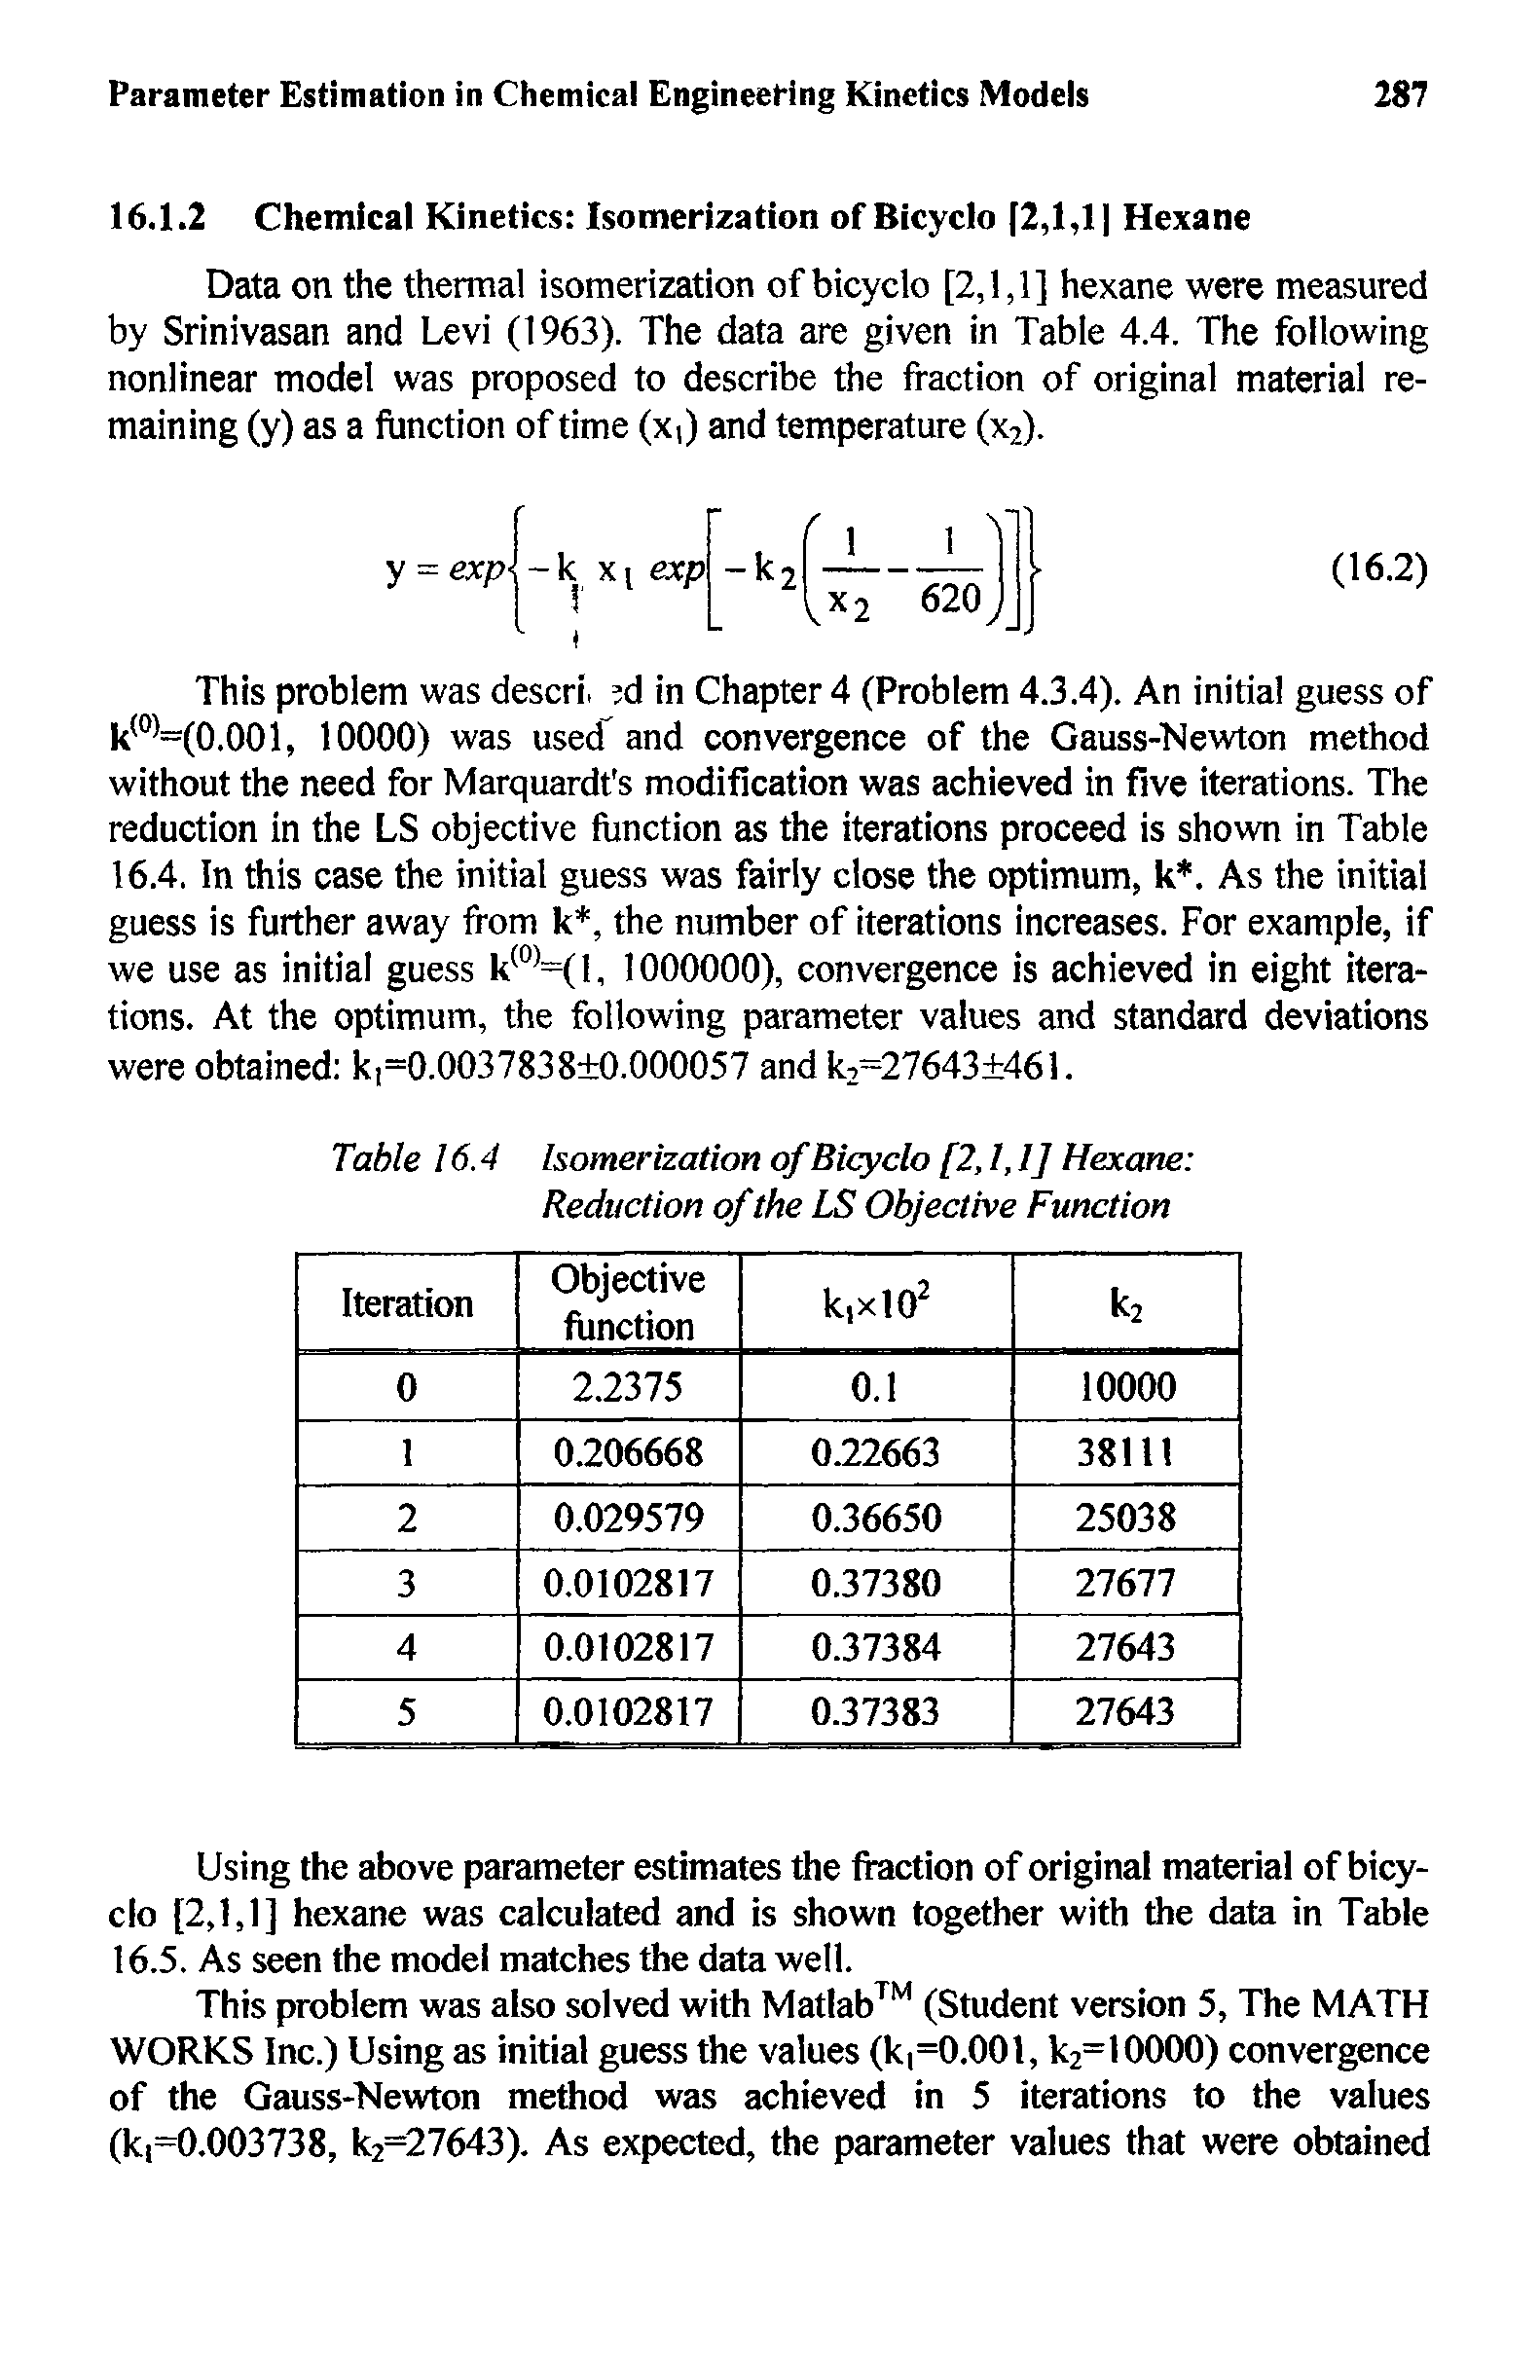 Table 16.4 Isomerization of Bicyclo [2,1,1] Hexane Reduction of the LS Objective Function...